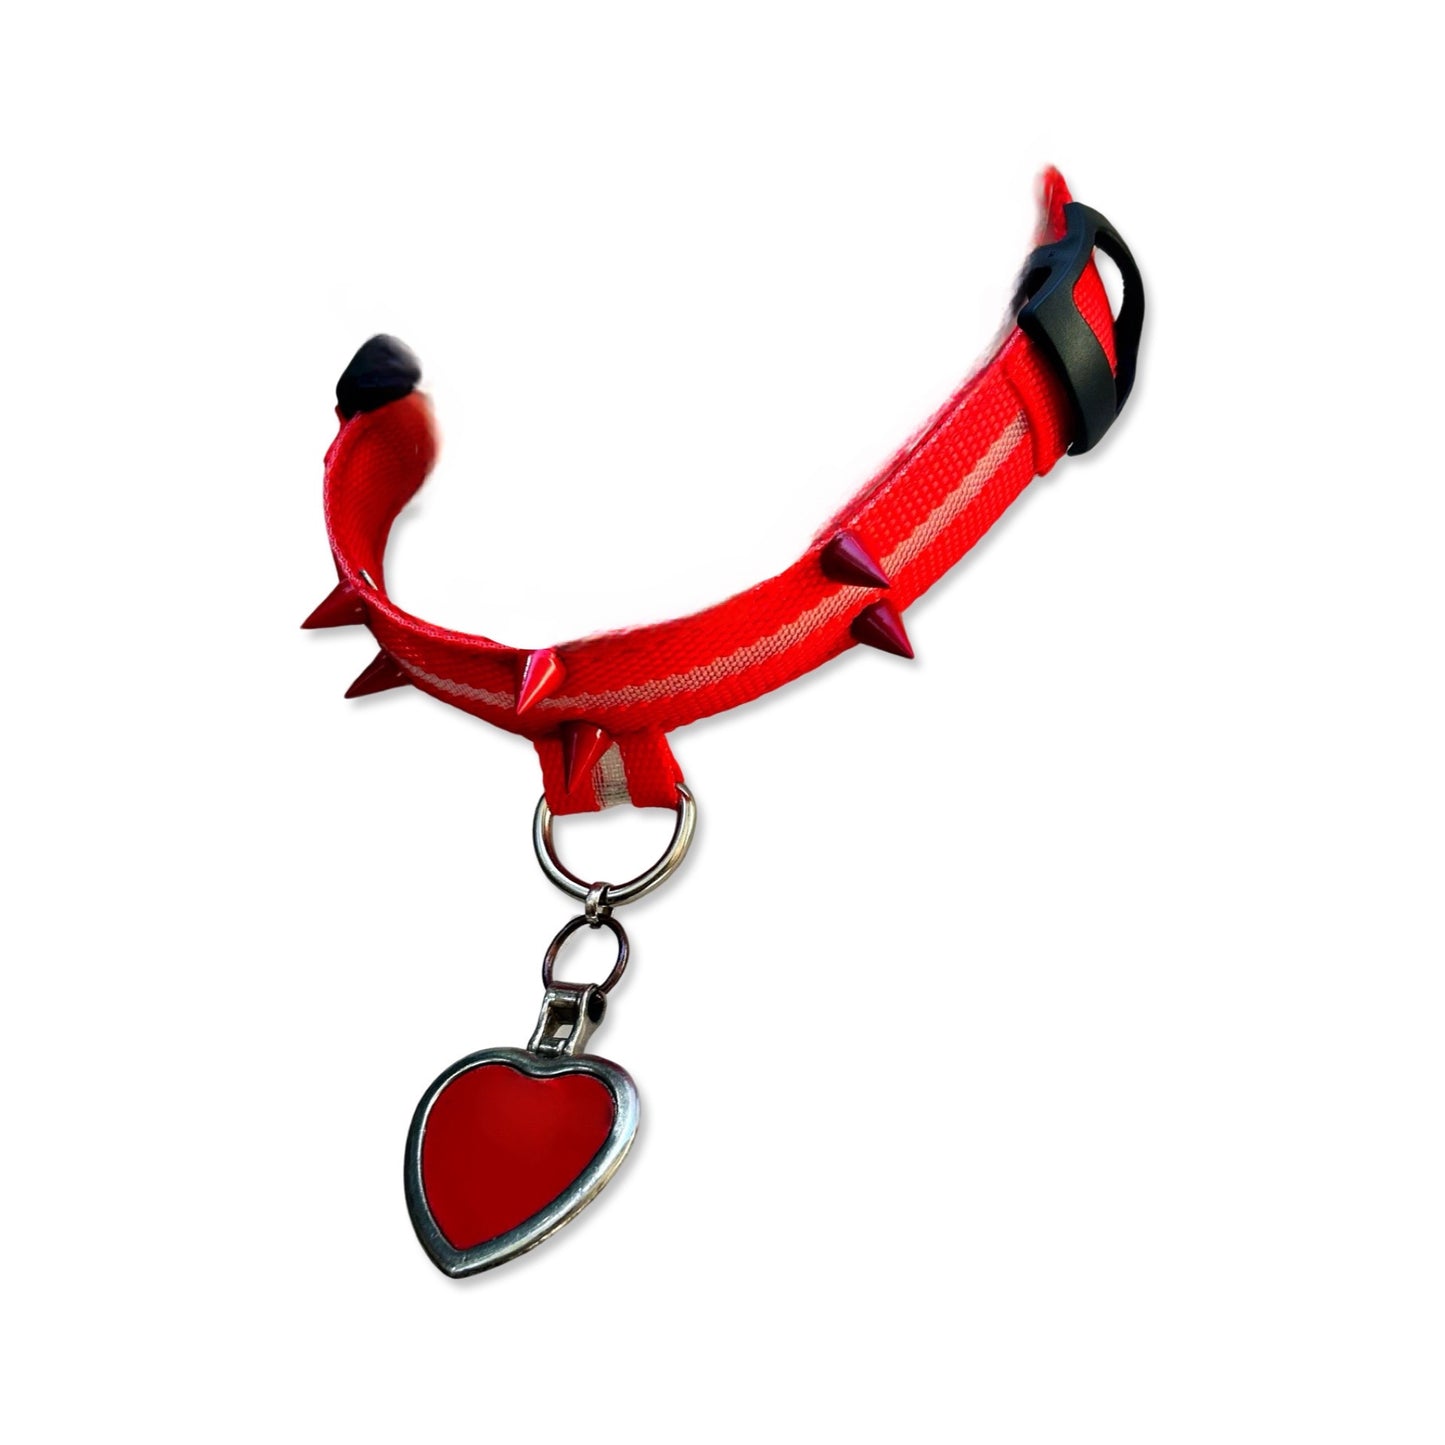 Cyber Love - (RED) Gender Neutral Red Studded LED Rave Cyberpunk Futuristic Festival Choker Necklace With Heart Pendant